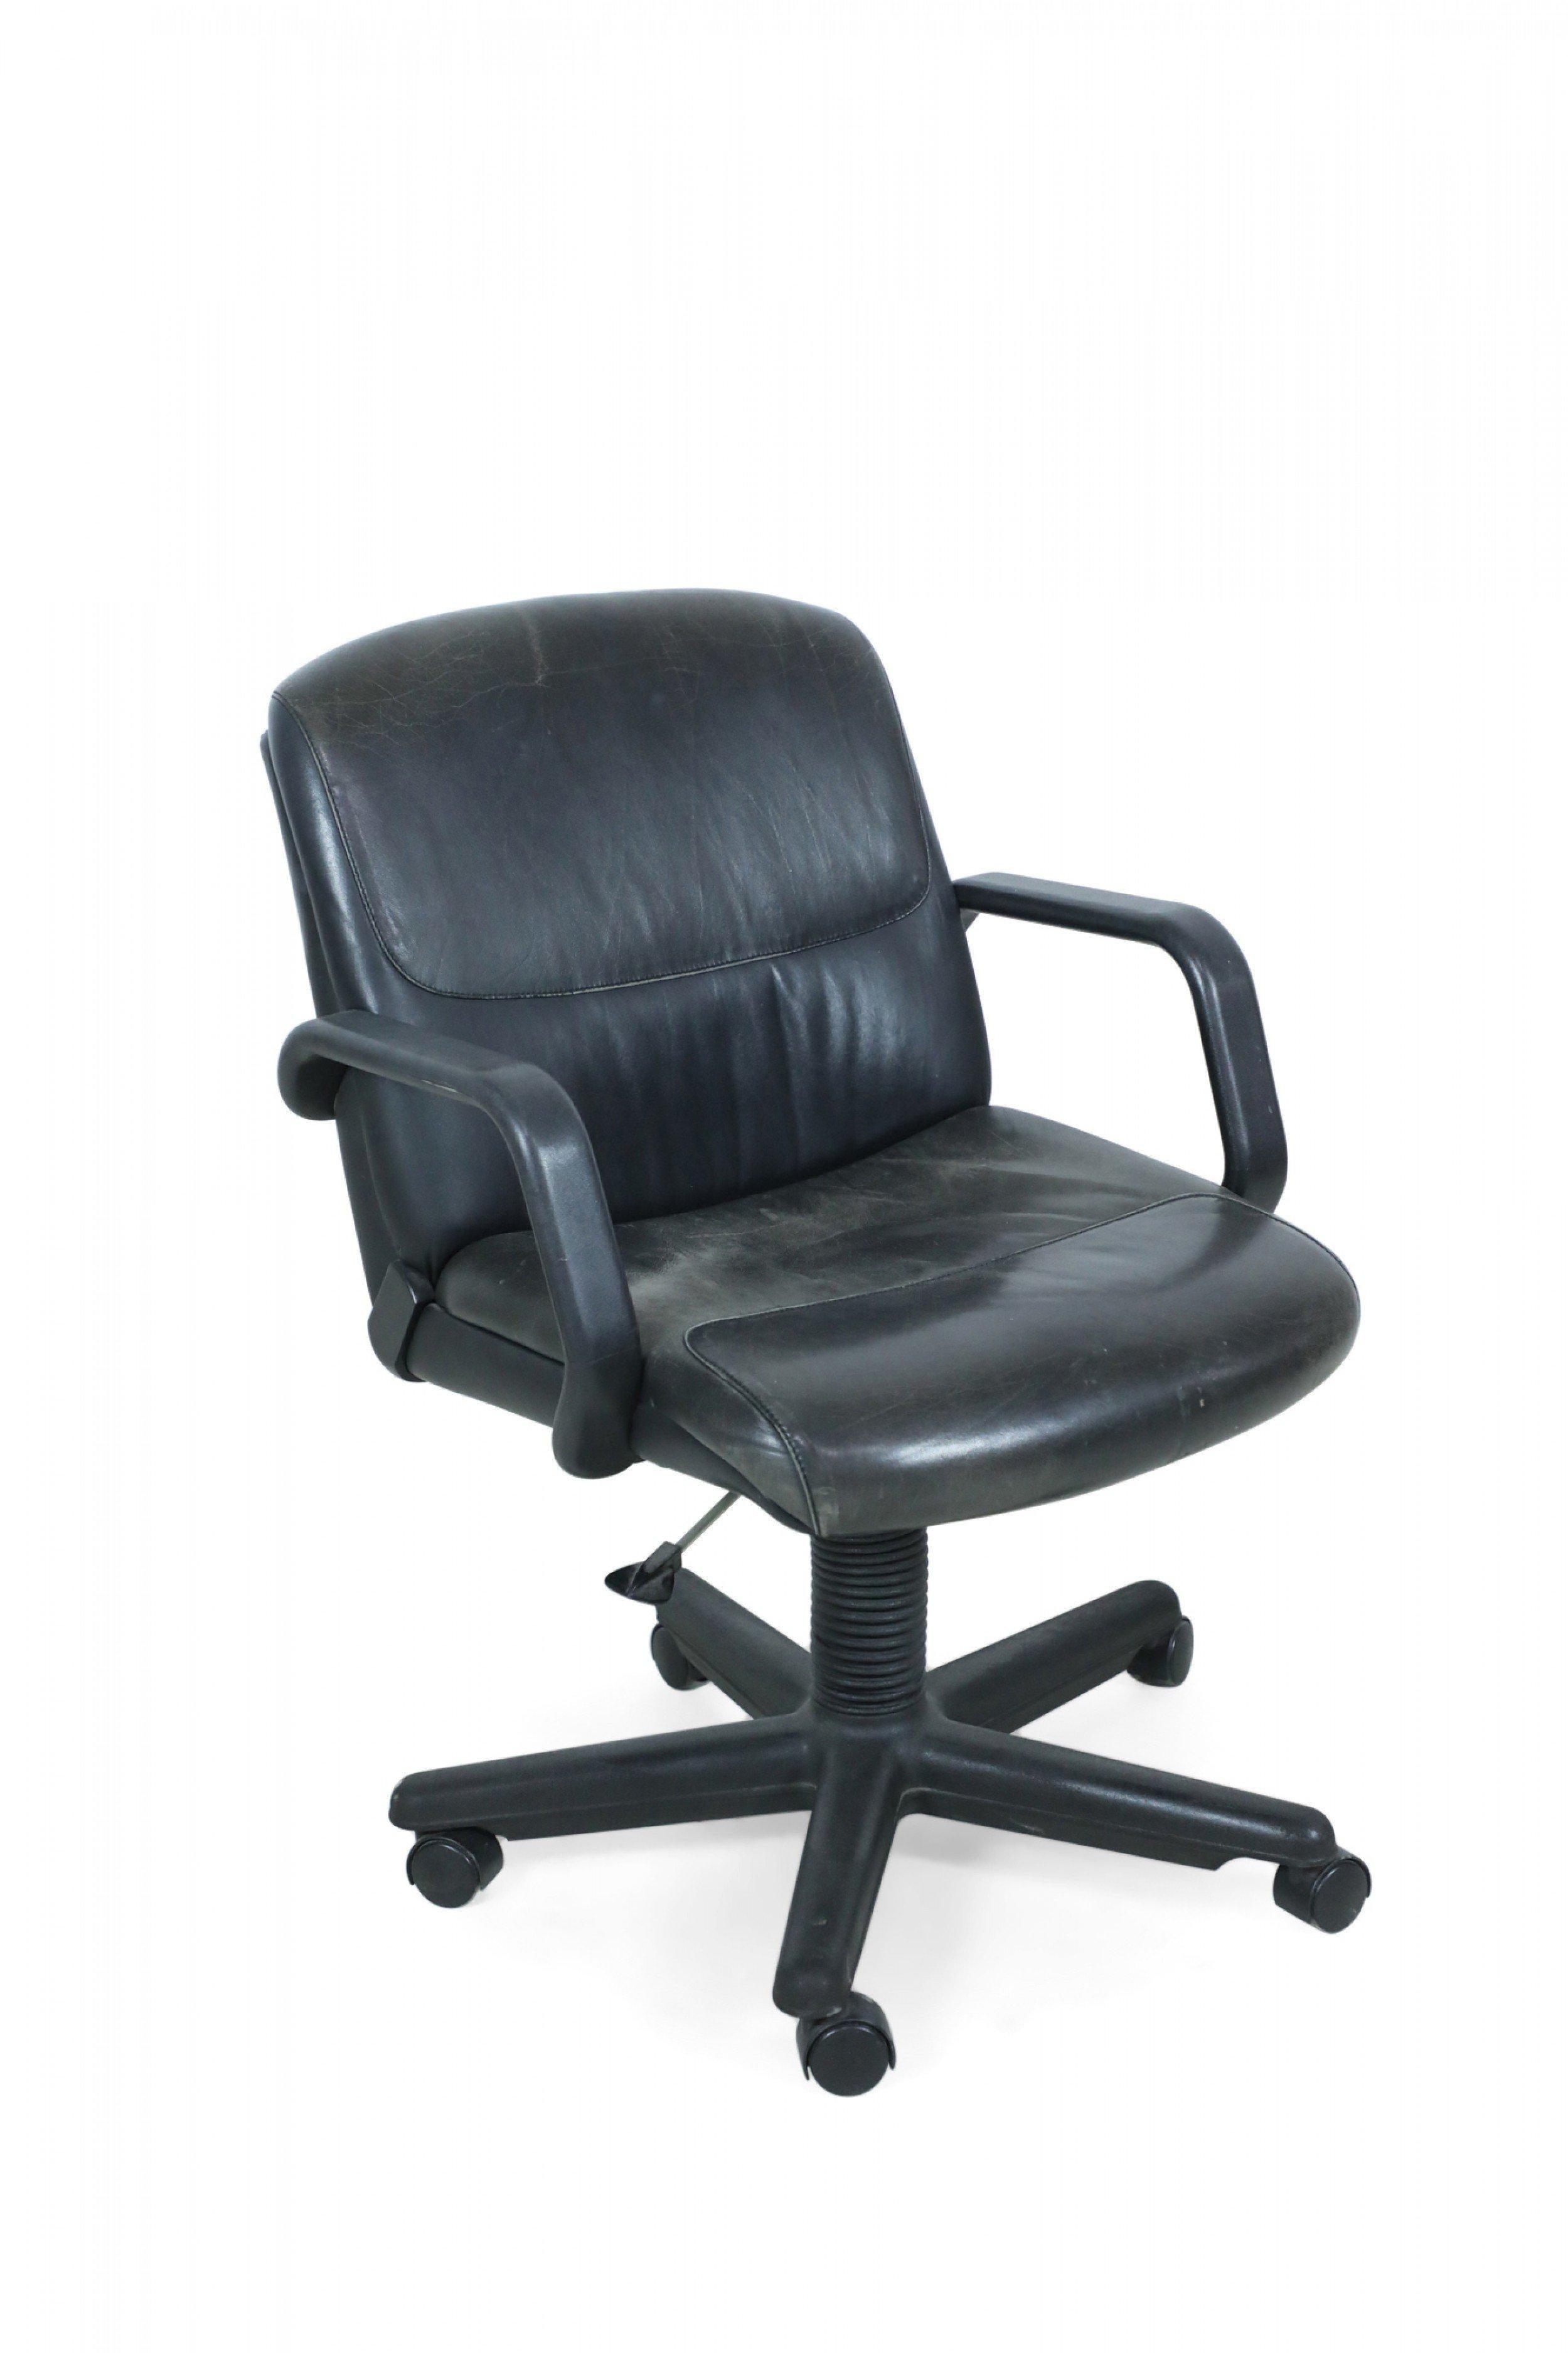 Metal Contemporary Black Leather Office Chair by Atelier Int For Sale